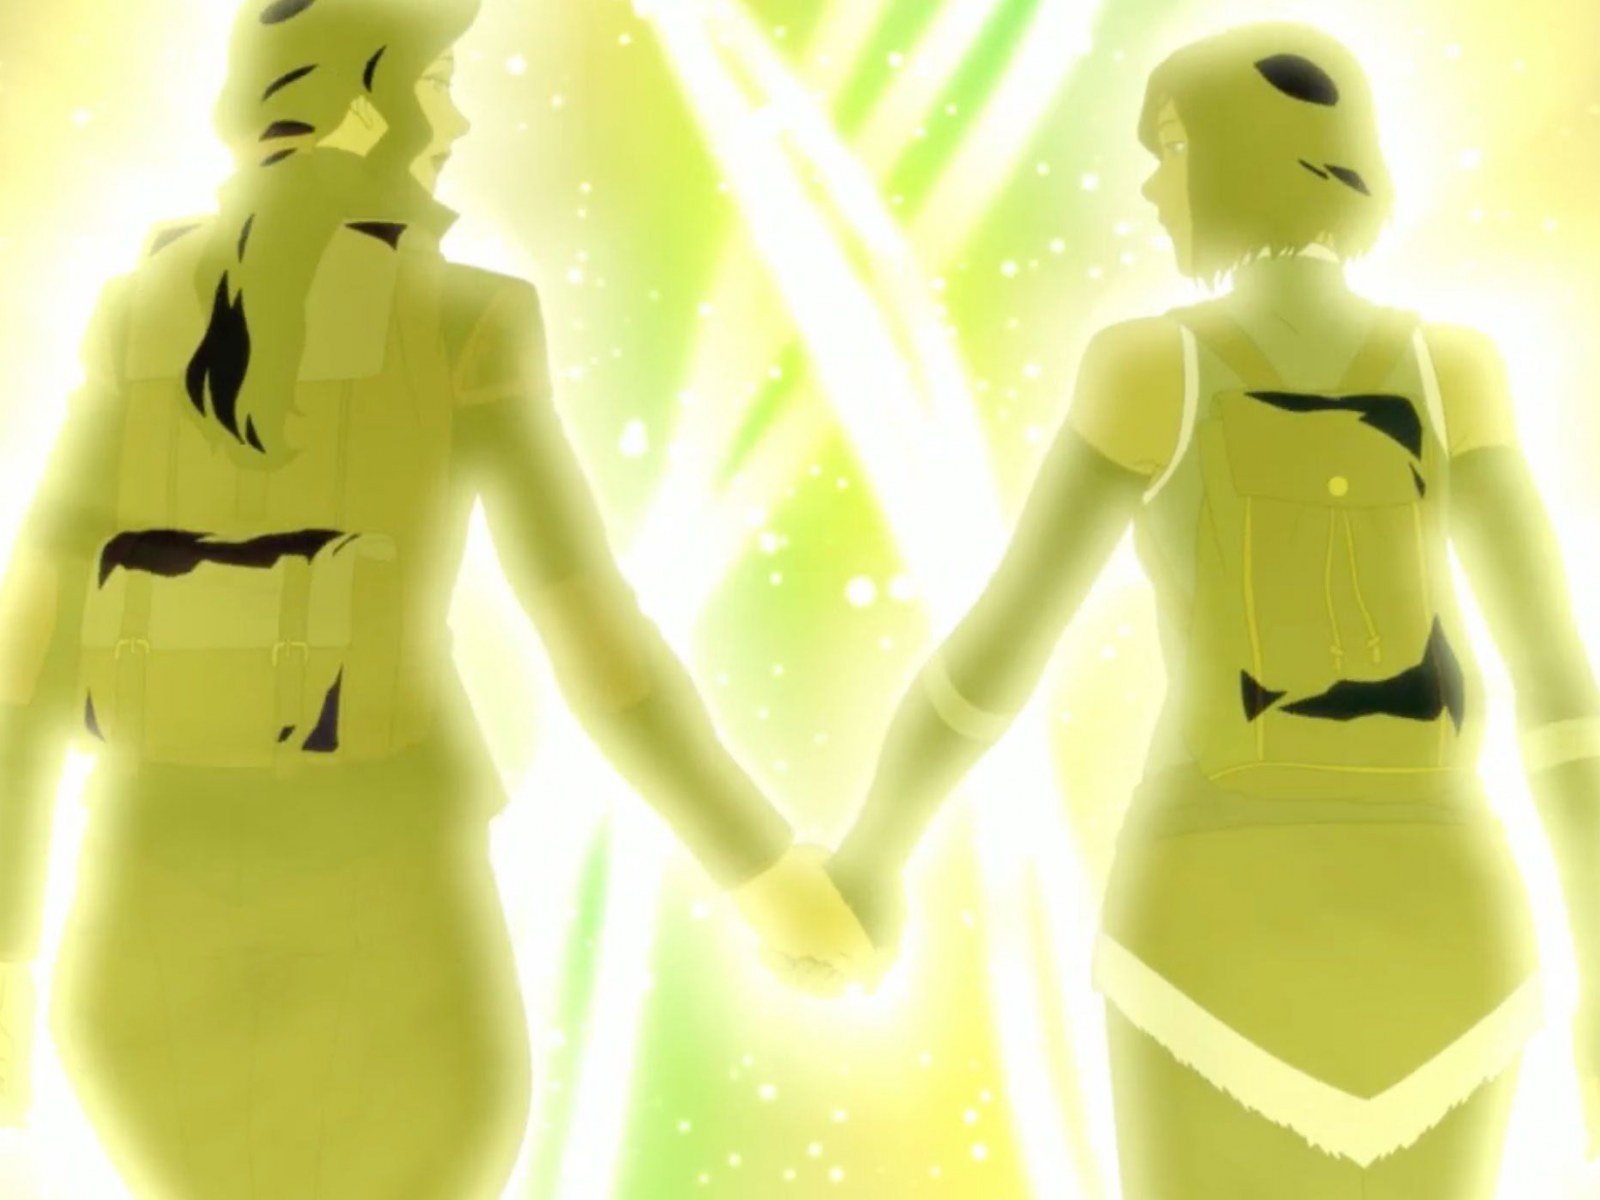 Two characters from "The Legend of Korra," Korra and Asami, holding hands. 